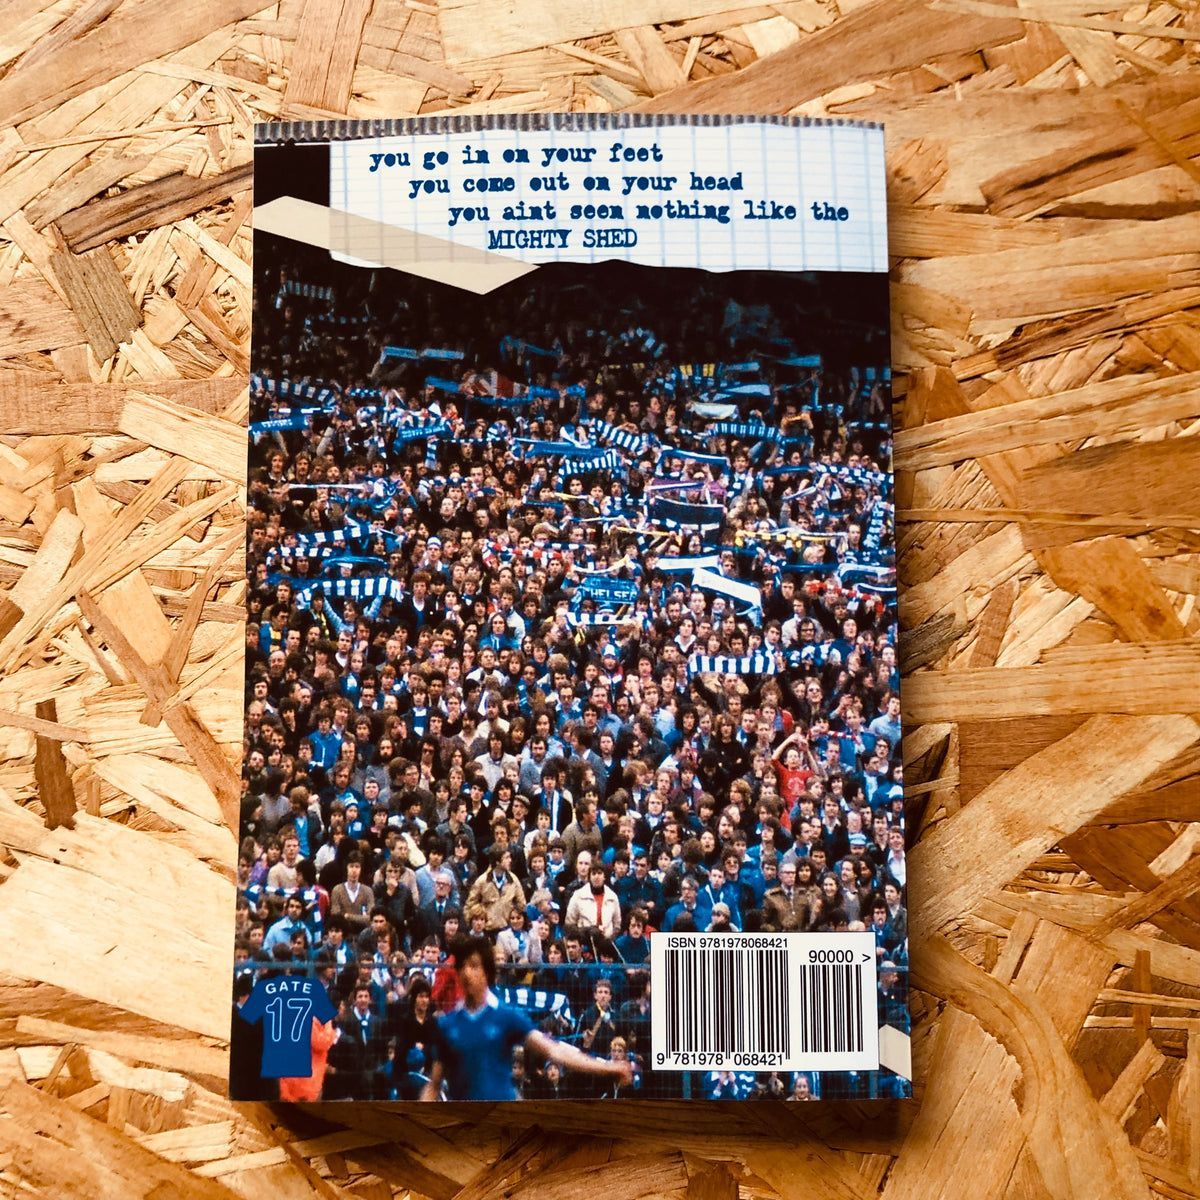 𝐑𝐄𝐒𝐓𝐎𝐂𝐊 | CAREFREE: CHELSEA CHANTS AND TERRACE CULTURE by @WalterOtton, @gate17marco A detailed exploration of the chants, songs and terrace culture associated with #chelseafc. 🛒 stanchionbooks.com/products/caref…